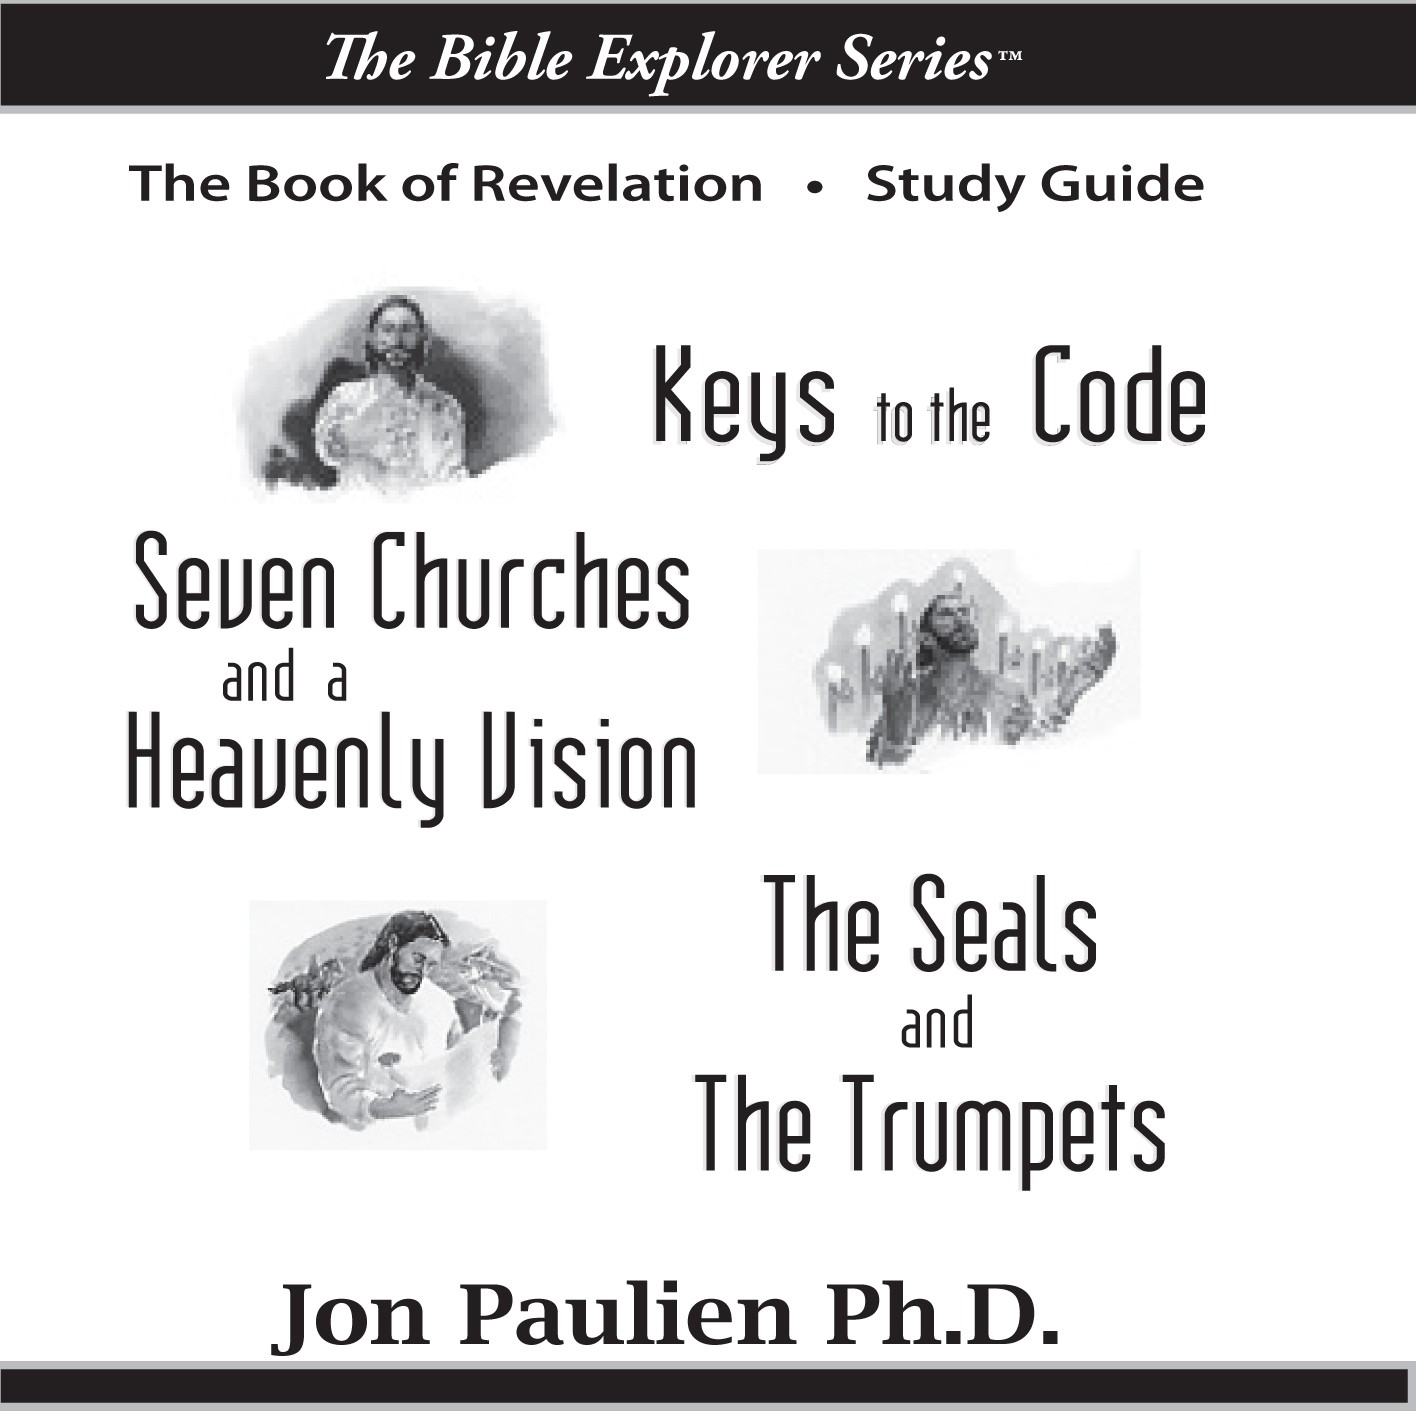 Free >> PDF Download >> Study Guide >> use with Jon Paulien's Revelation Series (BXDL-281 - 283)